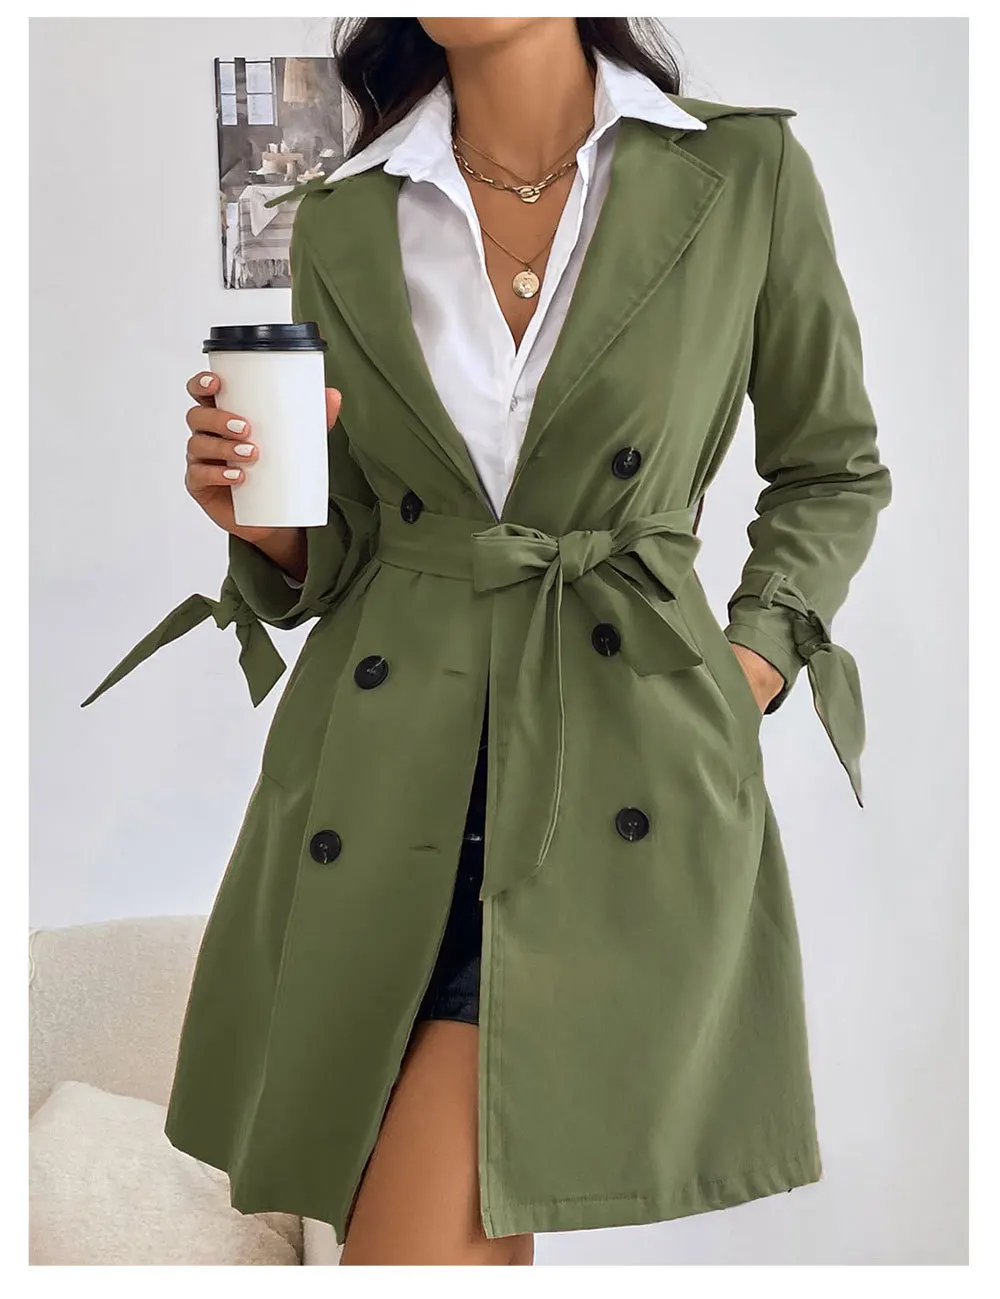 Autumn Winter Women's Casual Trench Coat With Double Breasted Windbreaker Jacket Ladies Army Green Outerwear - Trench - AliExpress